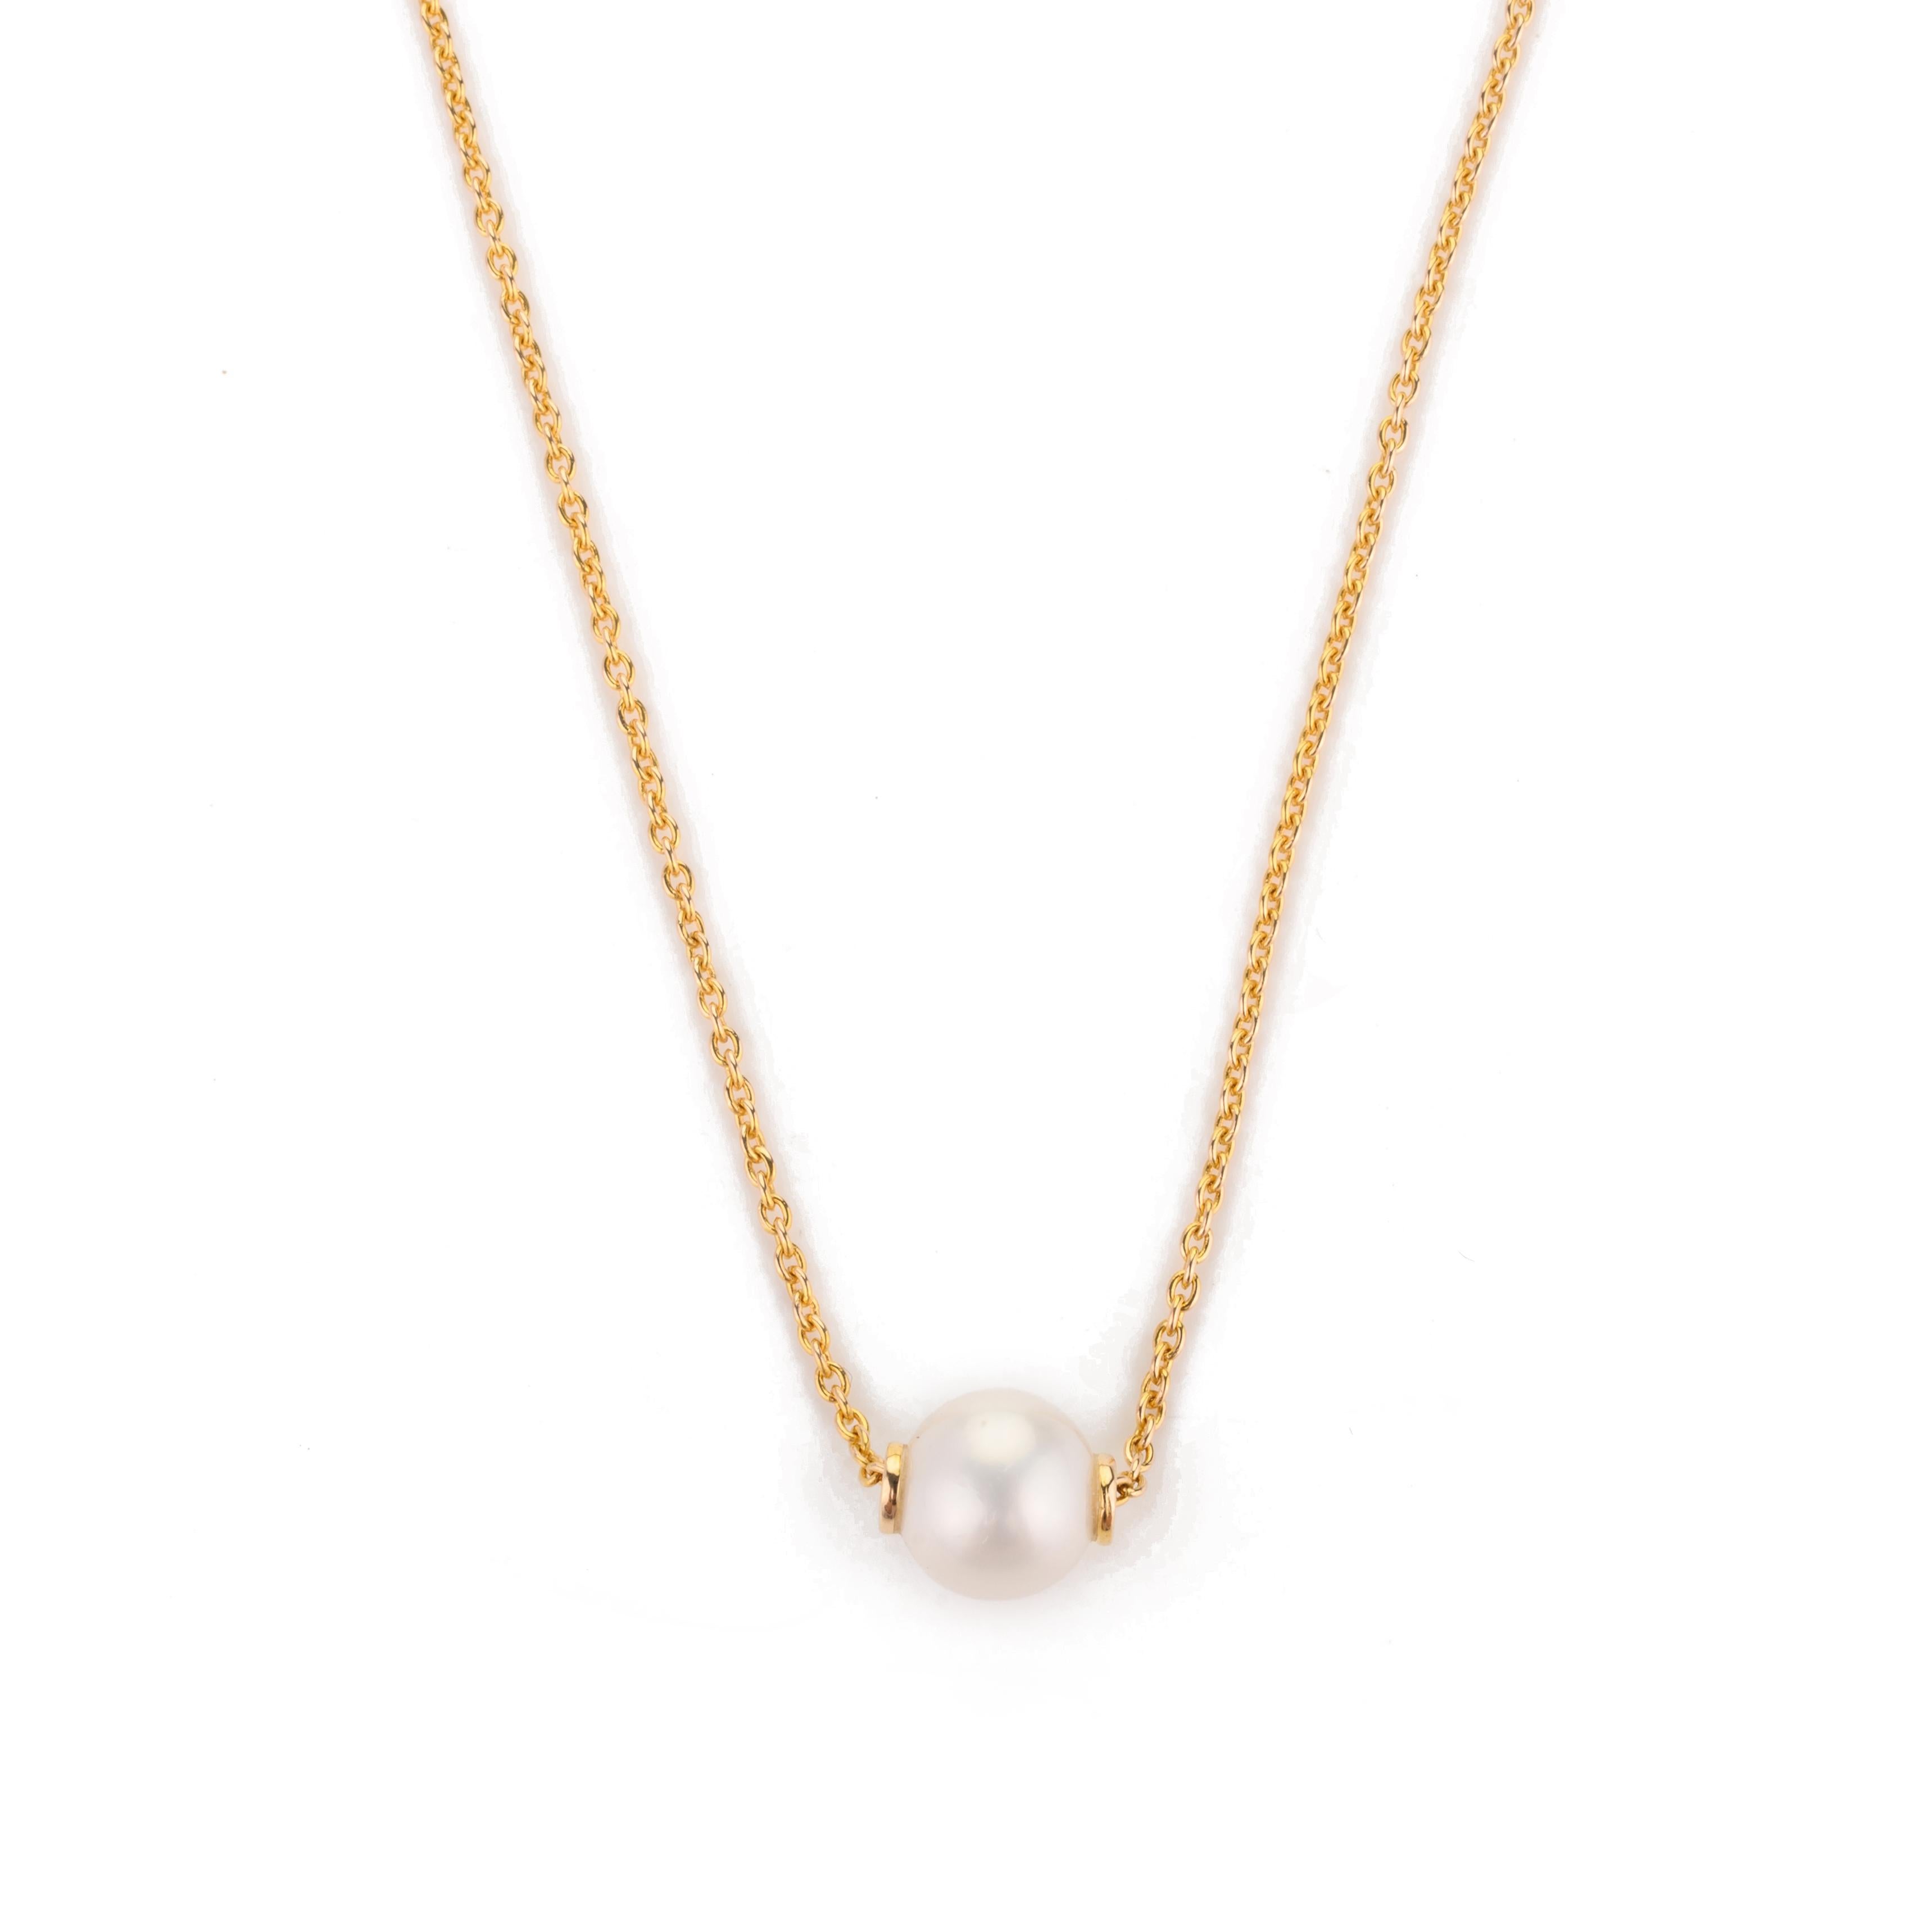 Modern 5 Carat Single Pearl Chain Necklace in 18k Solid Yellow Gold For Sale 2